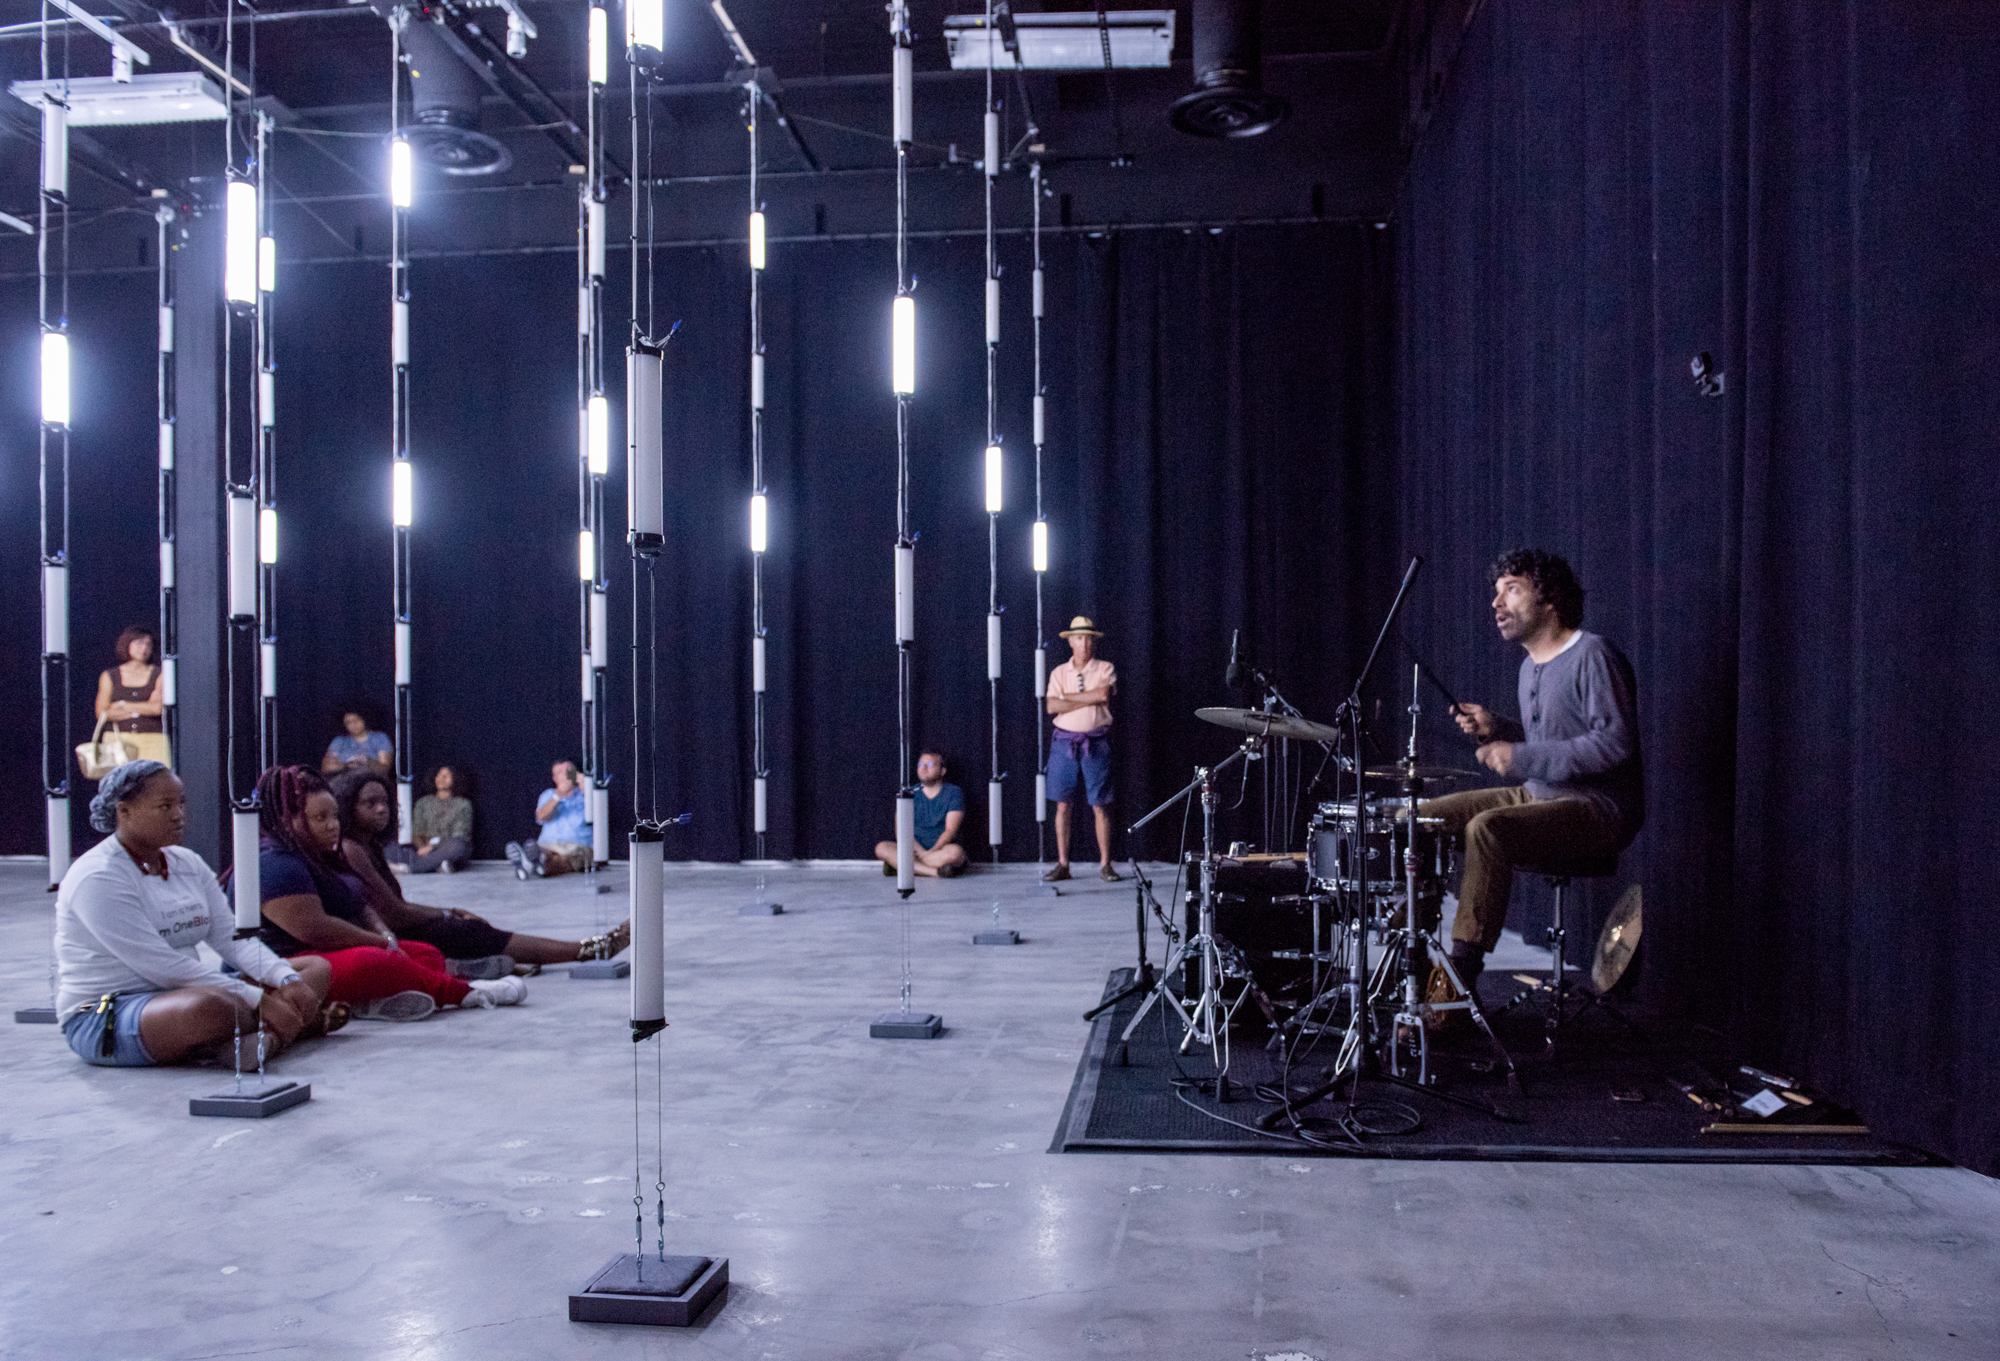 “Volumes” features daily drummer performances and special weekly performances by professionals. Photo by Peter Acker